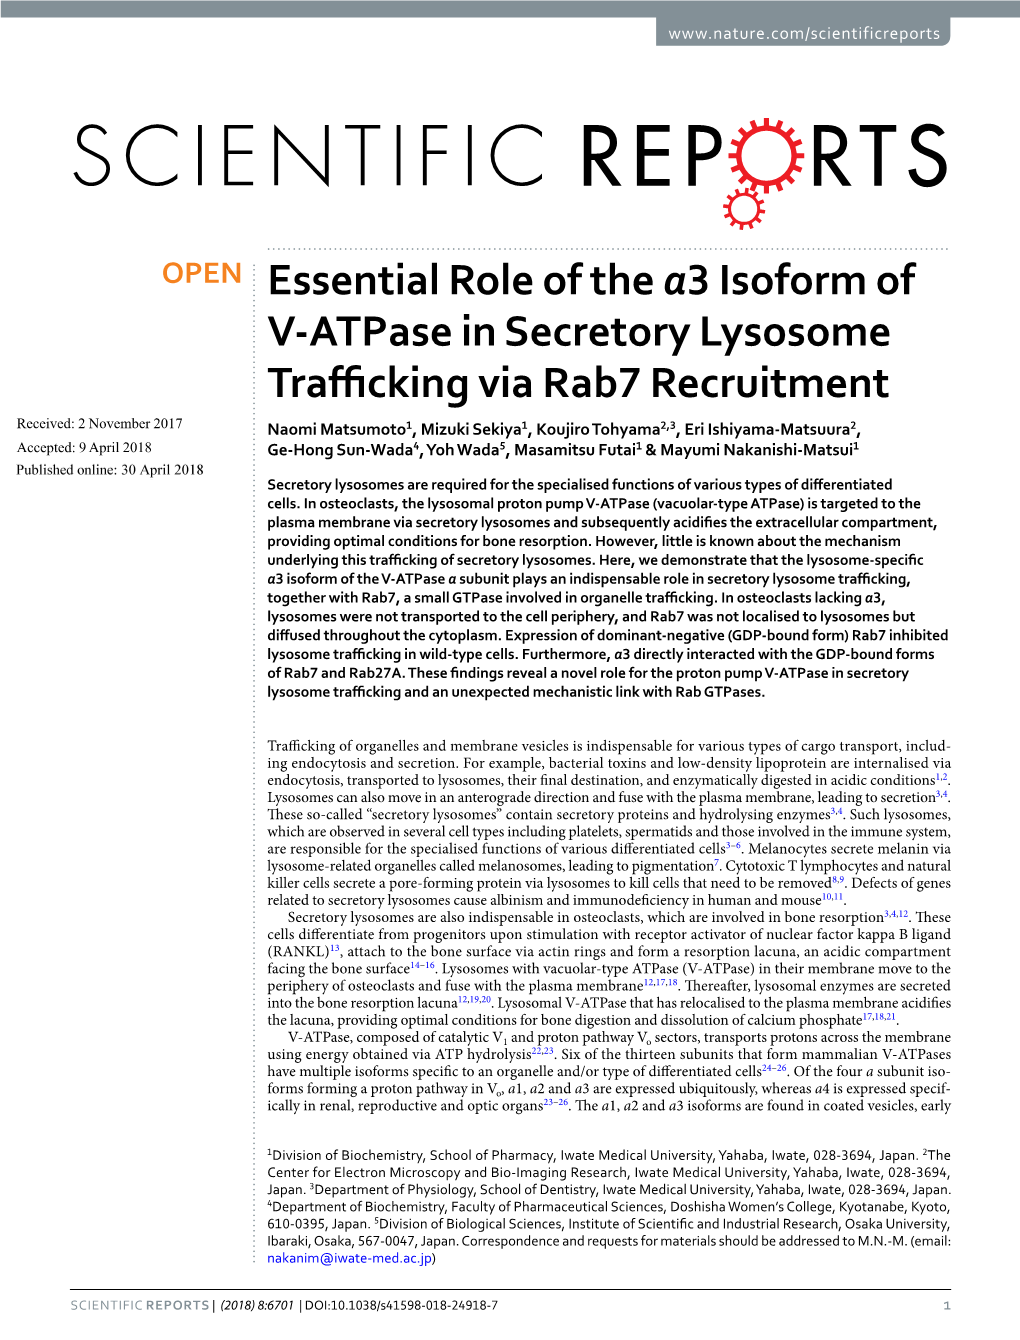 Essential Role of the A3 Isoform of V-Atpase in Secretory Lysosome Trafficking Via Rab7 Recruitment